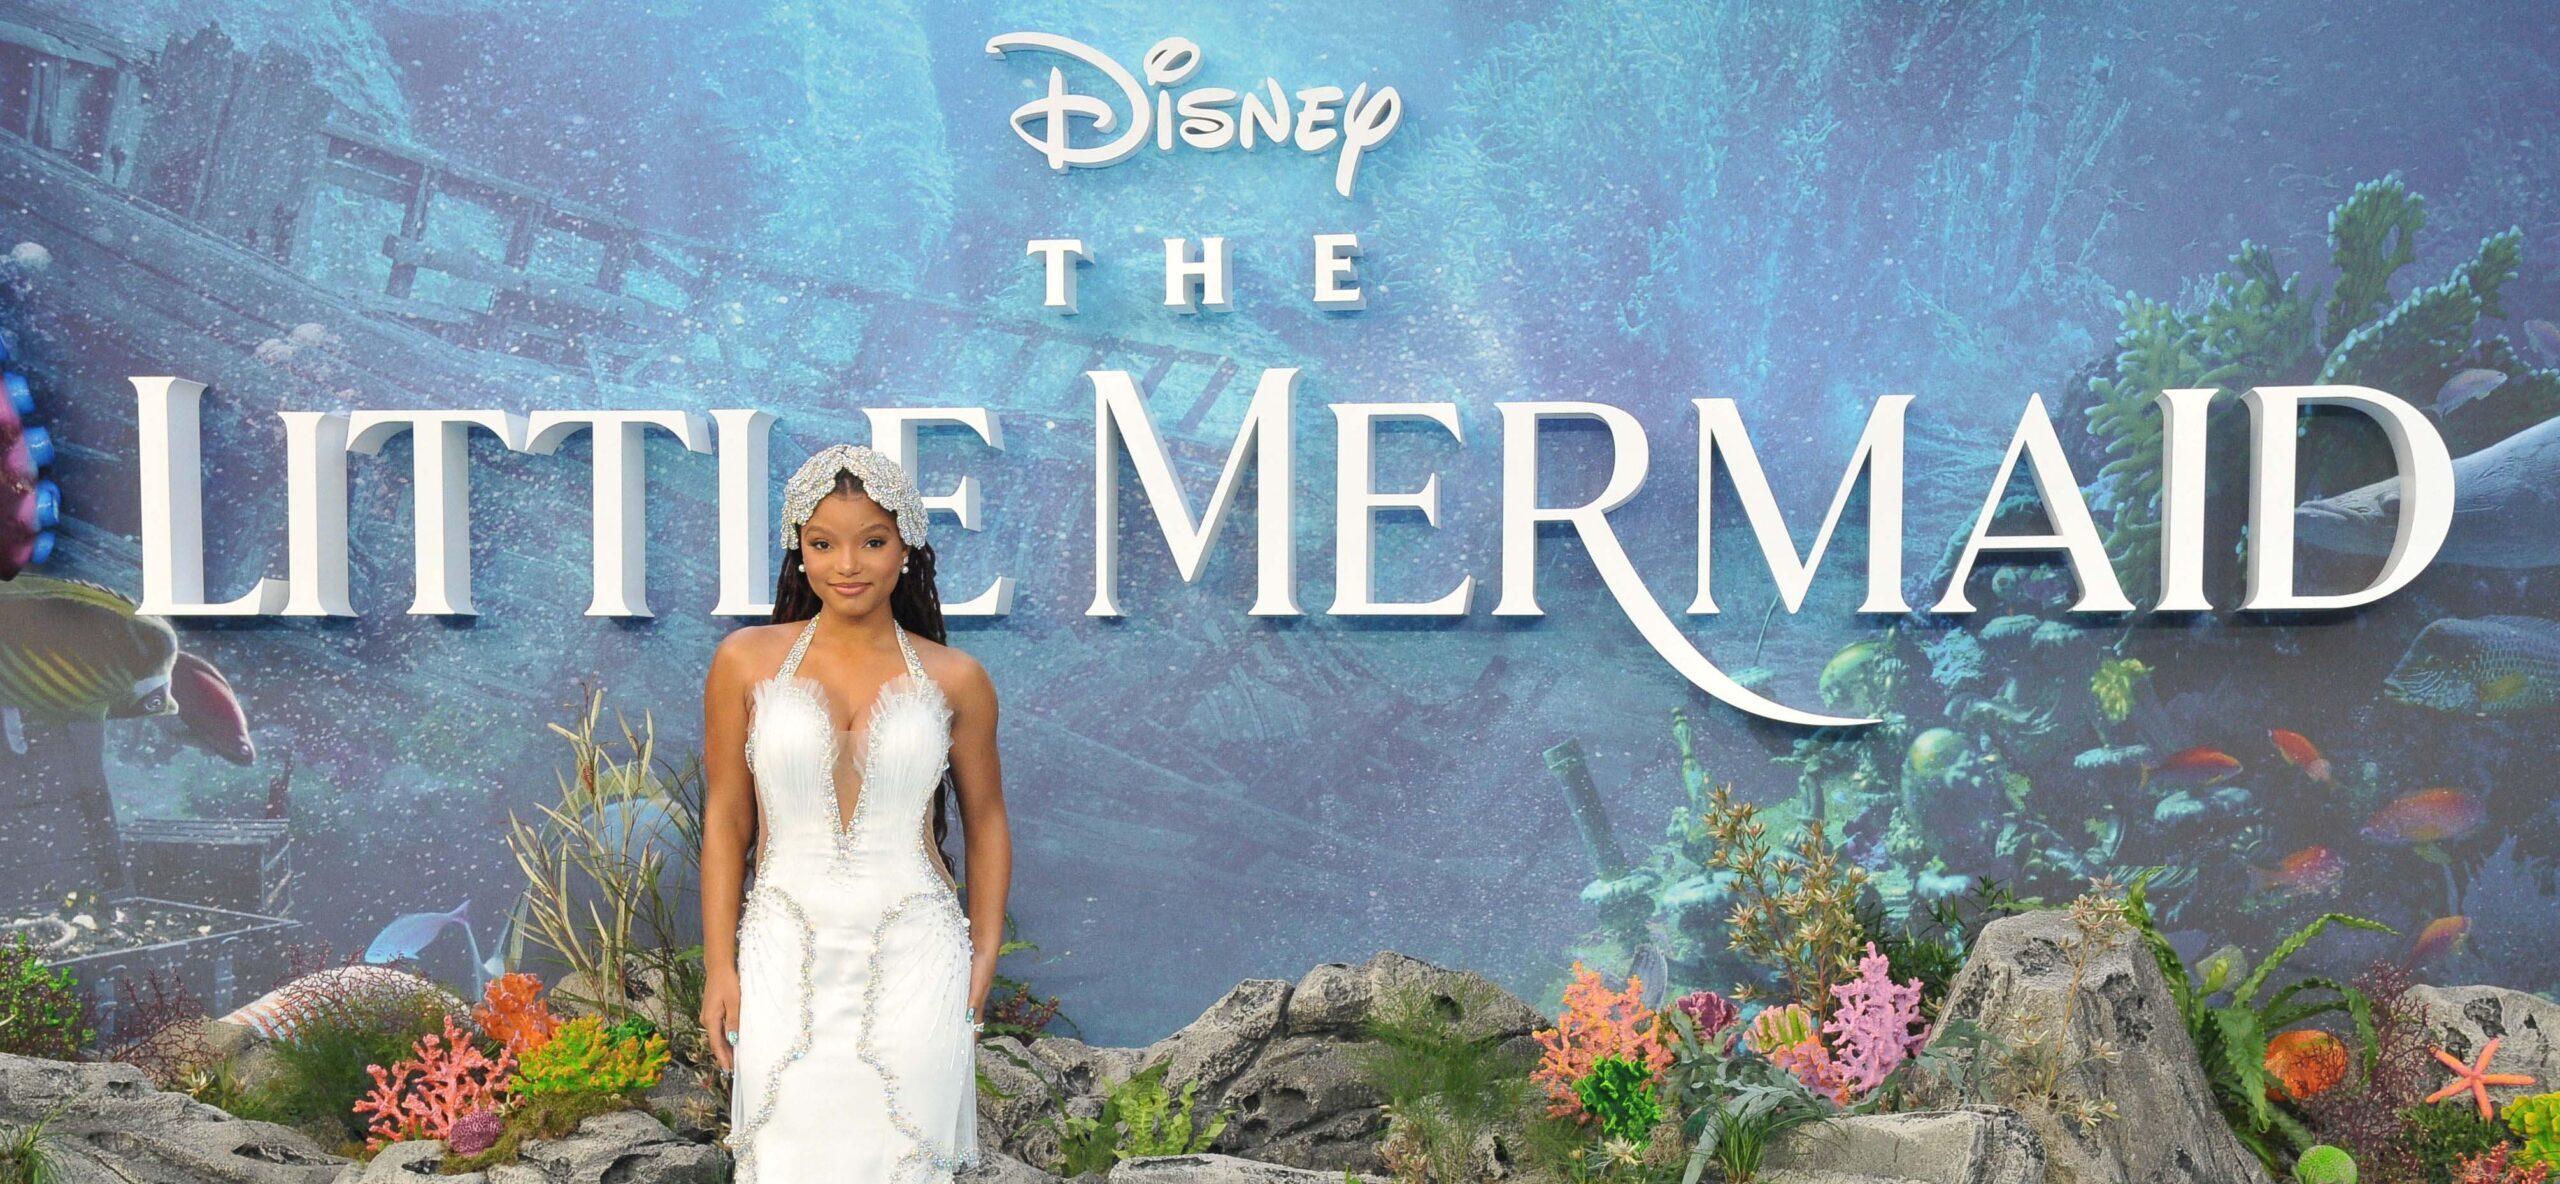 Video: Fight Breaks Out During Screening Of ‘The Little Mermaid’